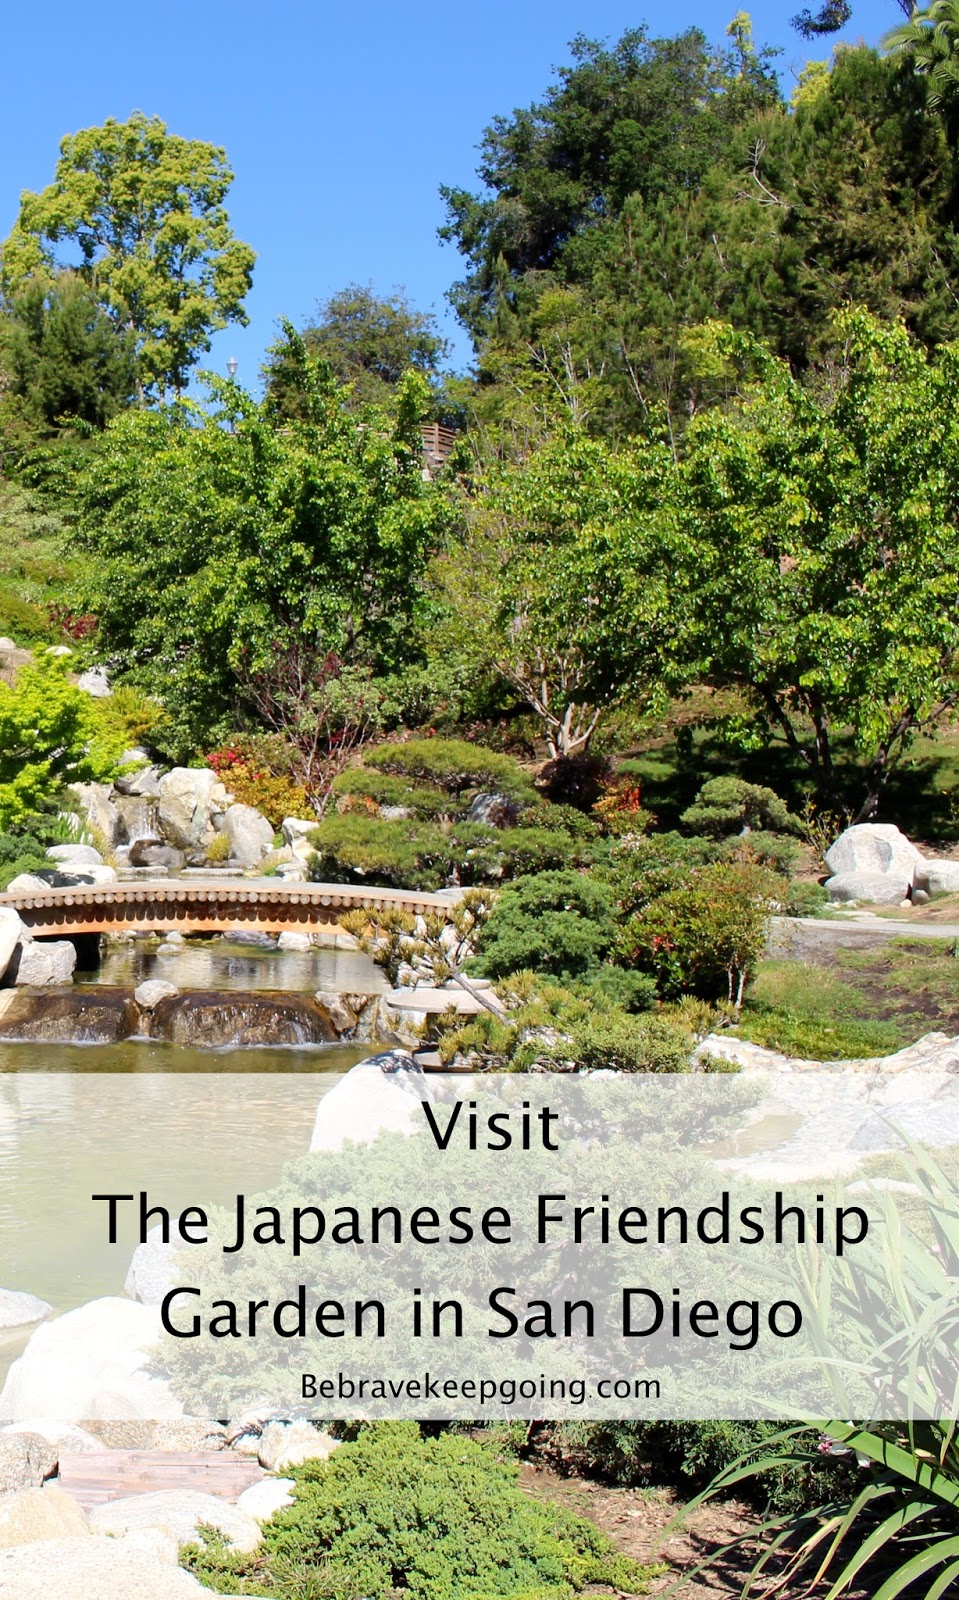 Be Brave, Keep Going: Our Visit To The Japanese Friendship Garden at